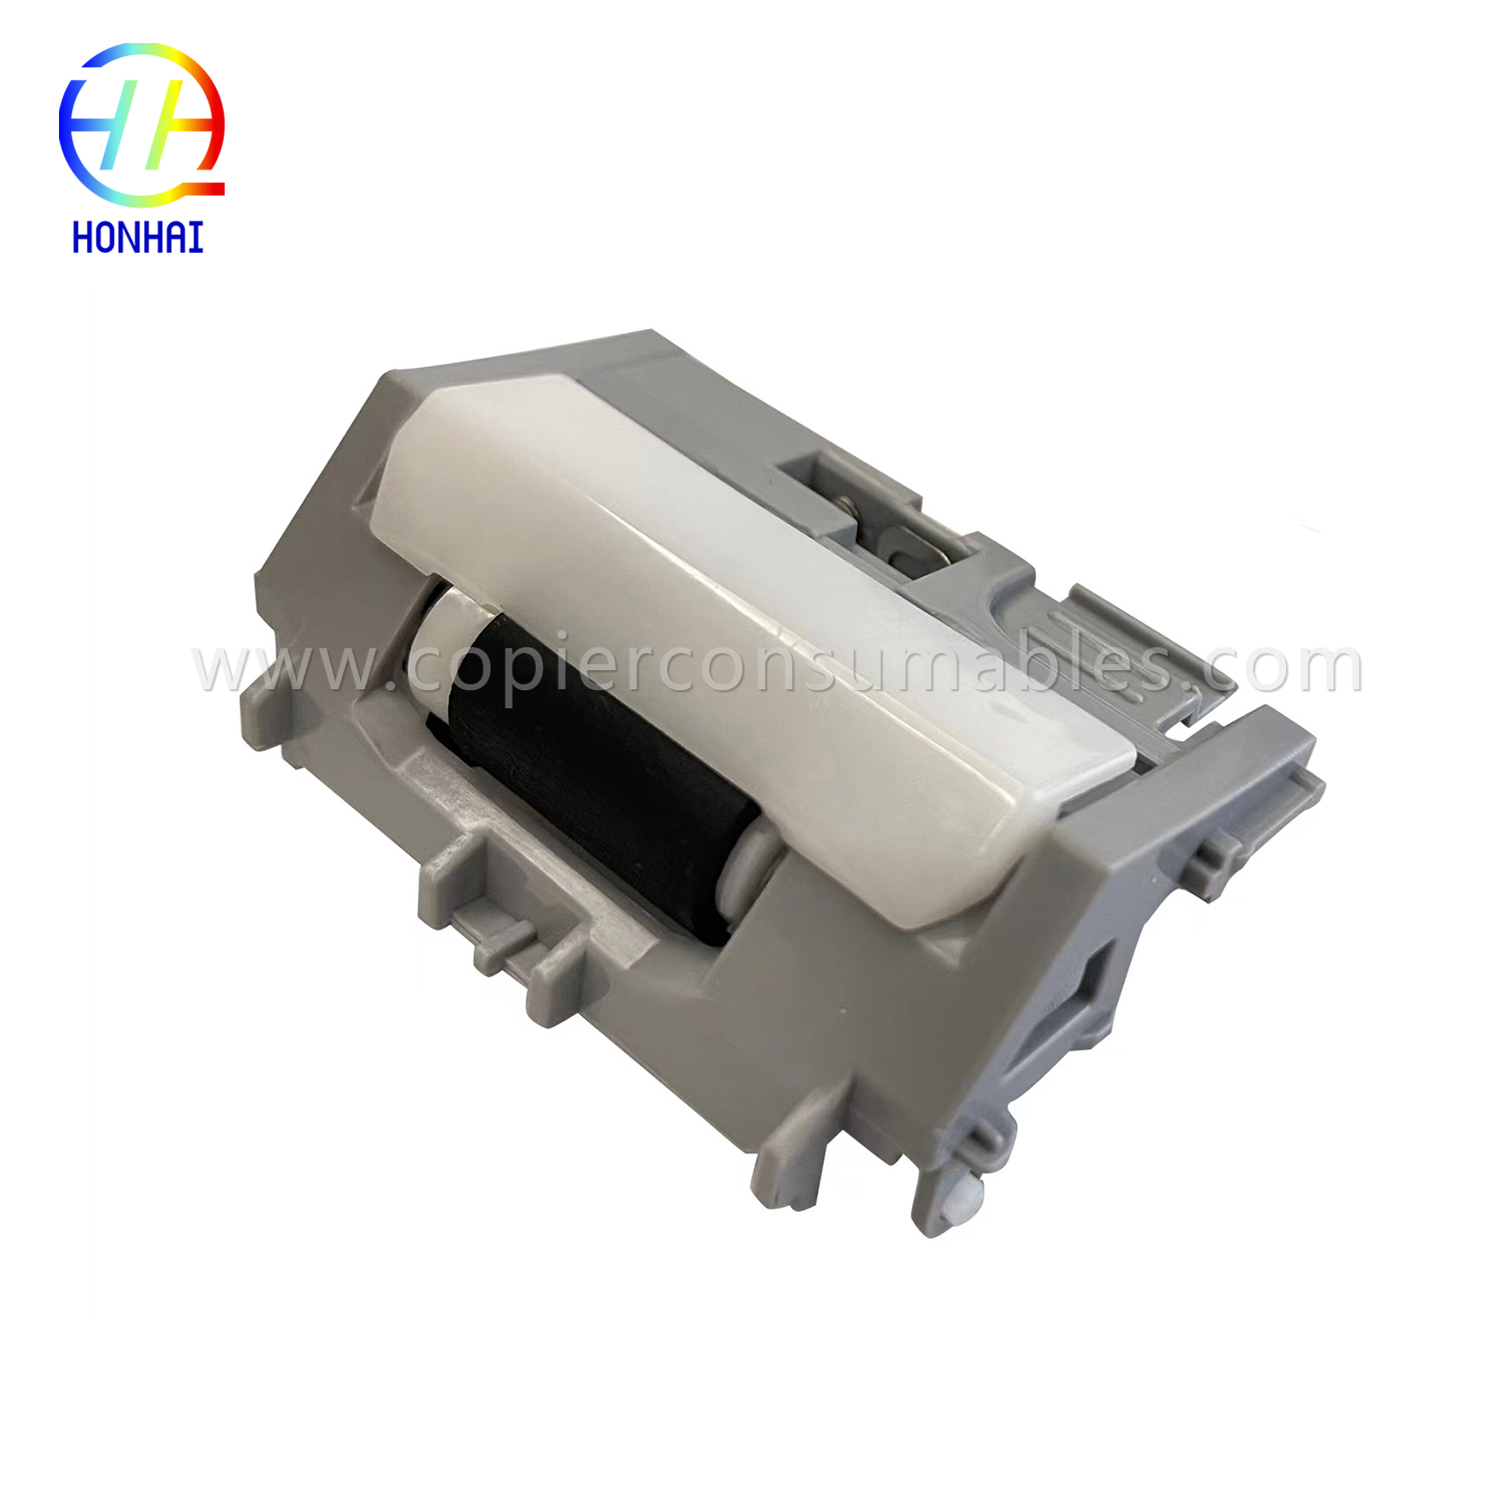 Tray 2 3 Separation Roller Assembly for HP Laserjet PRO M402dn M402dw M402n M403D M403dn M403dw M403n M501dn M501n Mfp-M426dw M426fdn M426fdw (RM2-5745-000CN)